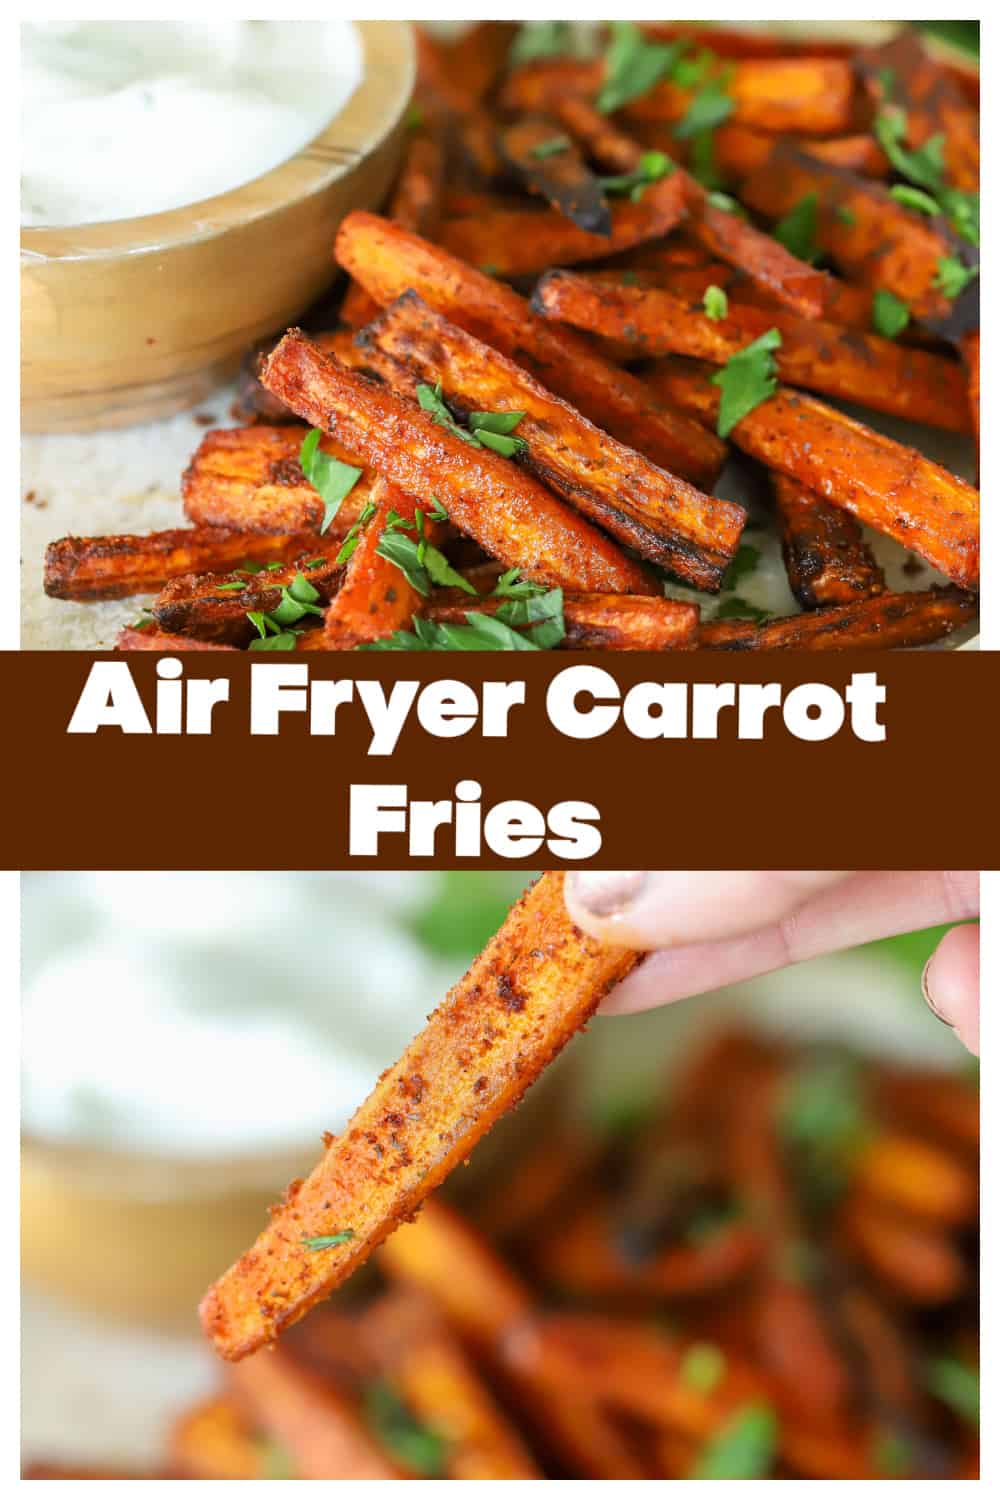 Want a new, fun way to eat your veggies?  These Air Fryer Carrot Fries are!  Healthy, gluten-free, easy and absolutely delicious.  via @jennikolaus